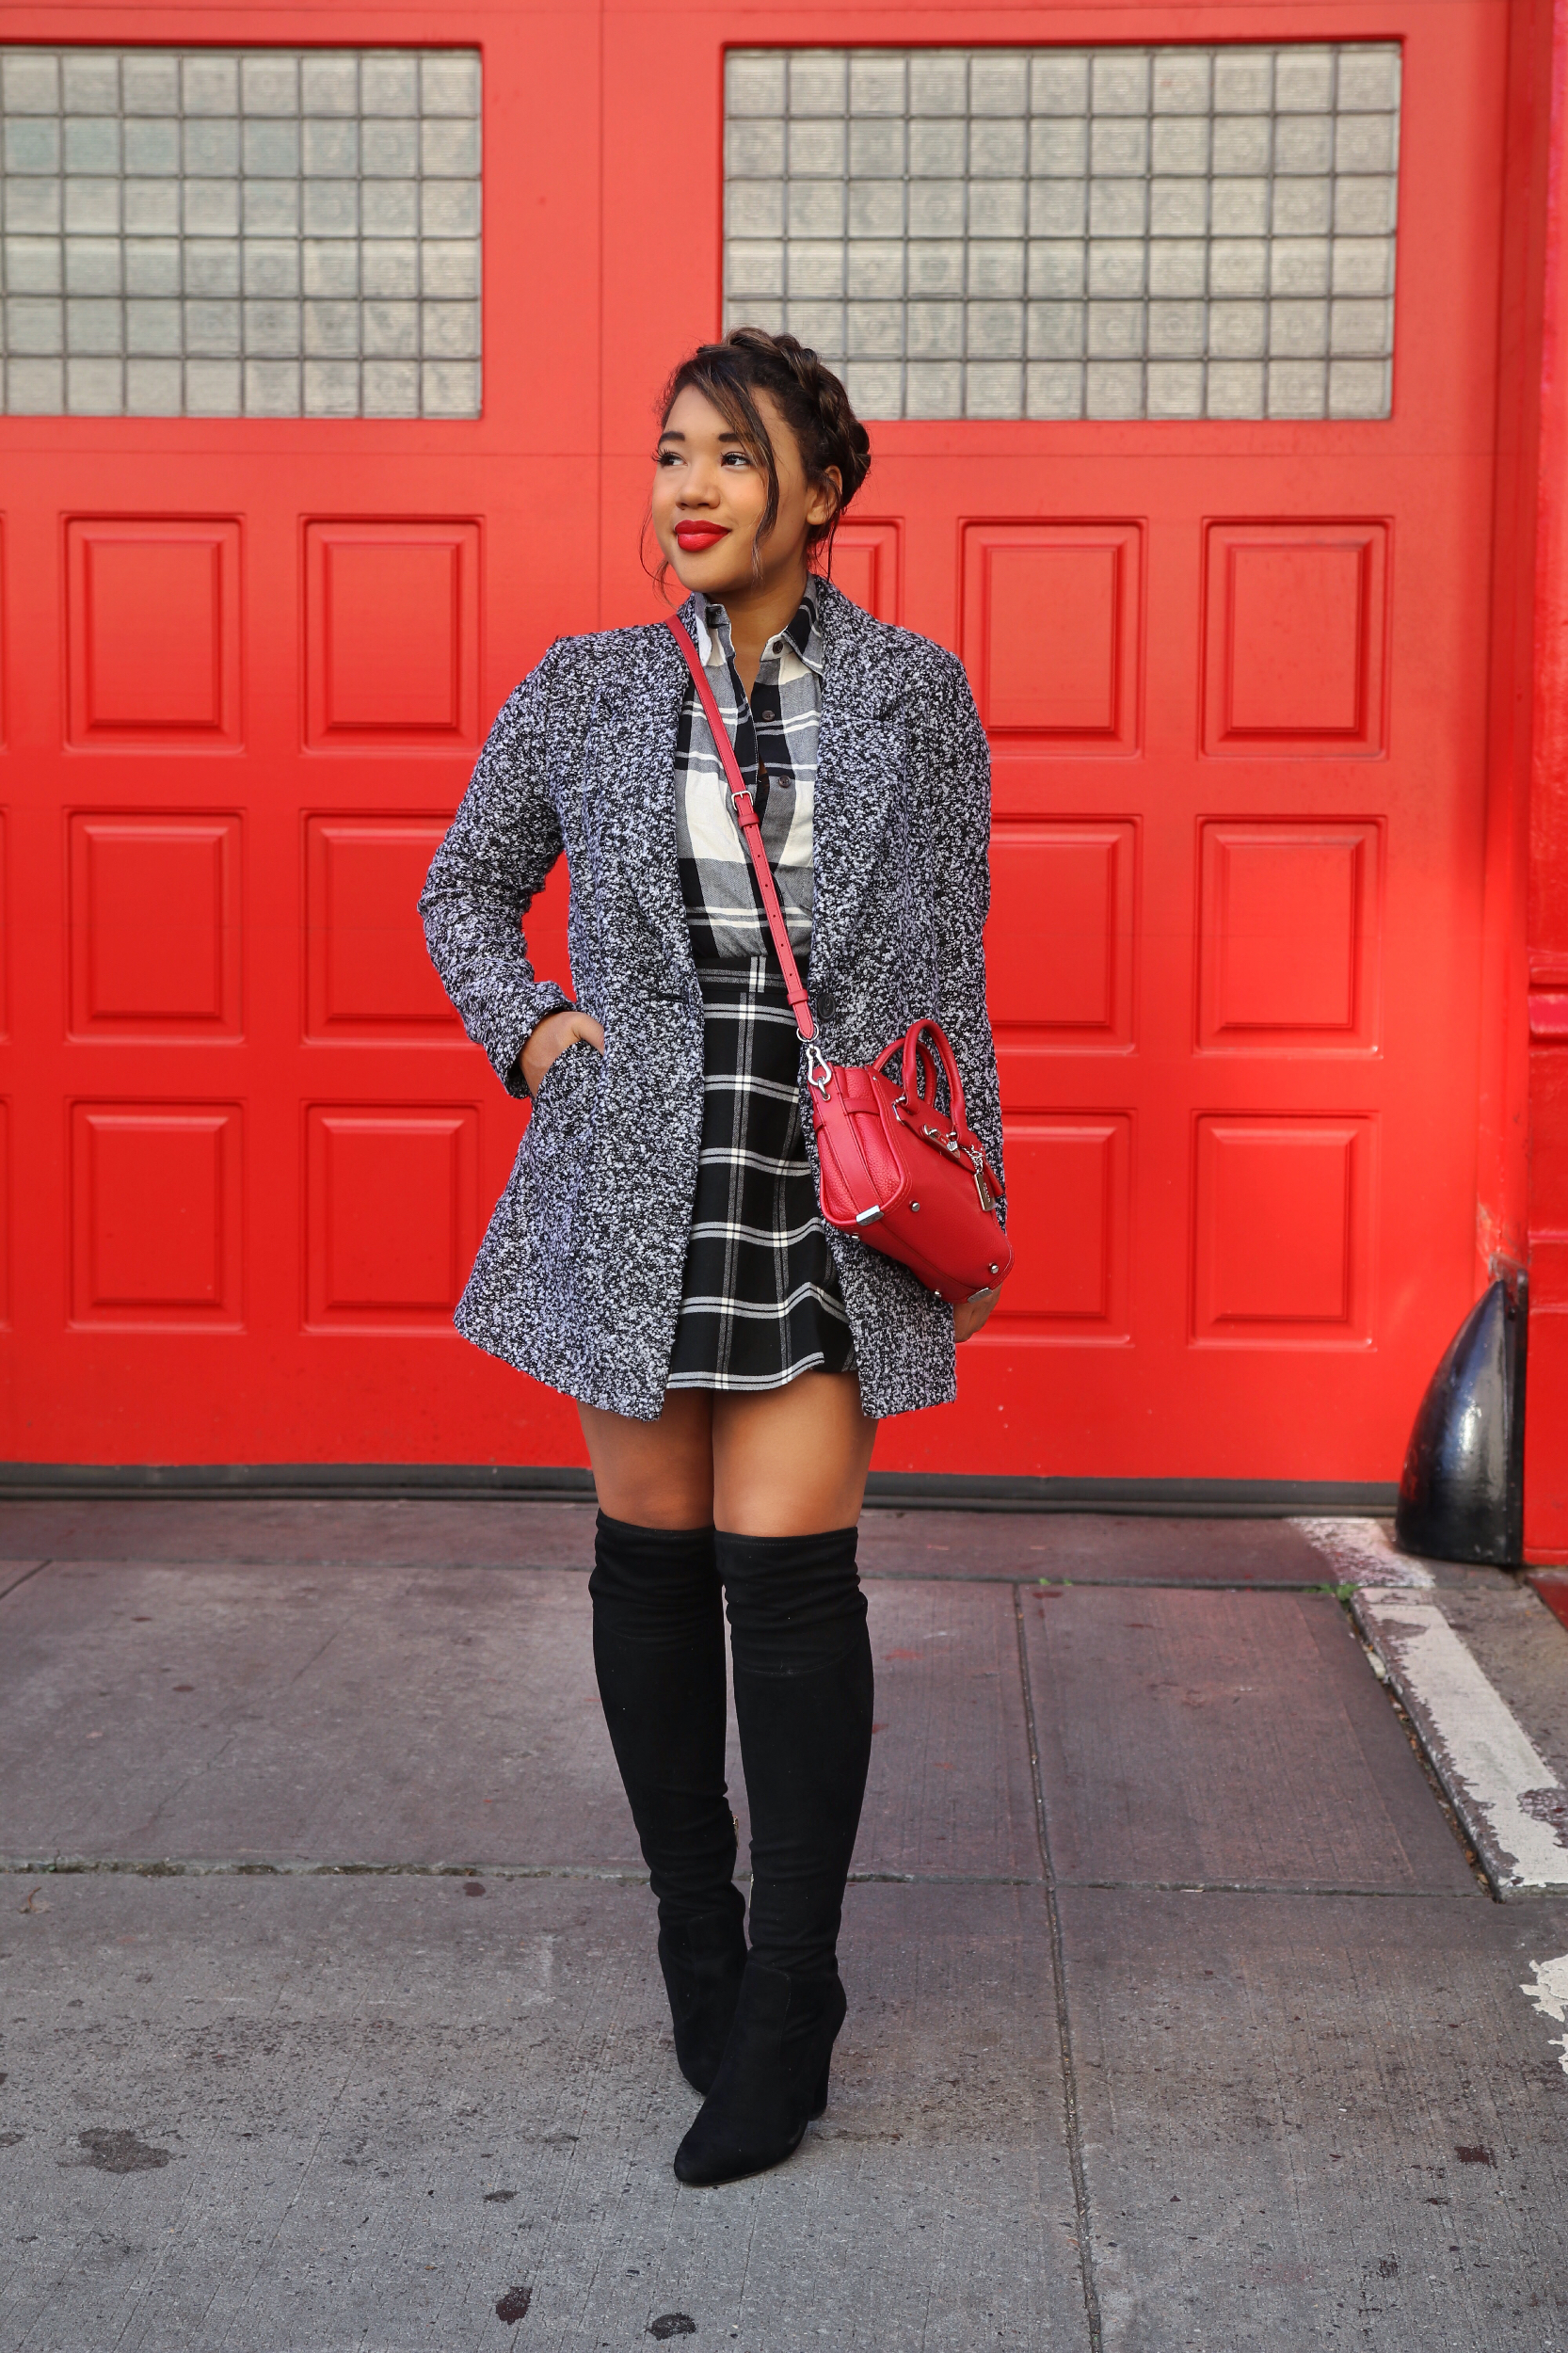 Over The Boots with plaid! Fall style by Color Me Courtney (@colormecourtney) // How to wear plaid for fall #plaid #overthekneeboots #otkboot #patternmixing #blackandwhite